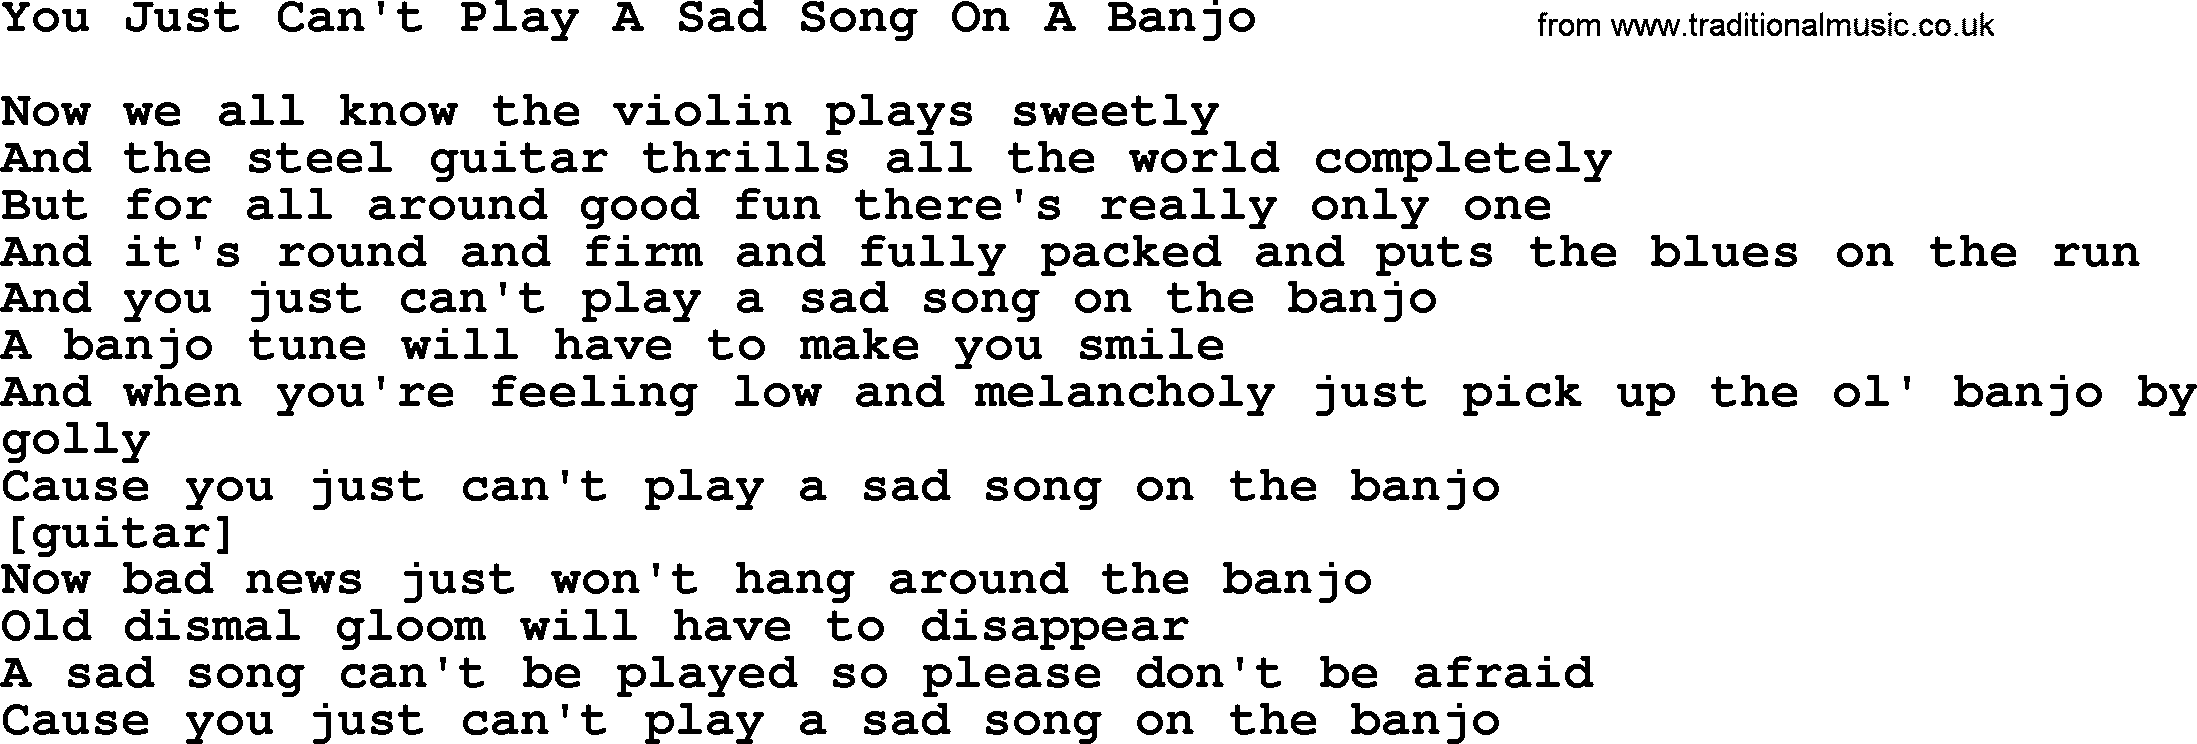 Willie Nelson song: You Just Can't Play A Sad Song On A Banjo lyrics